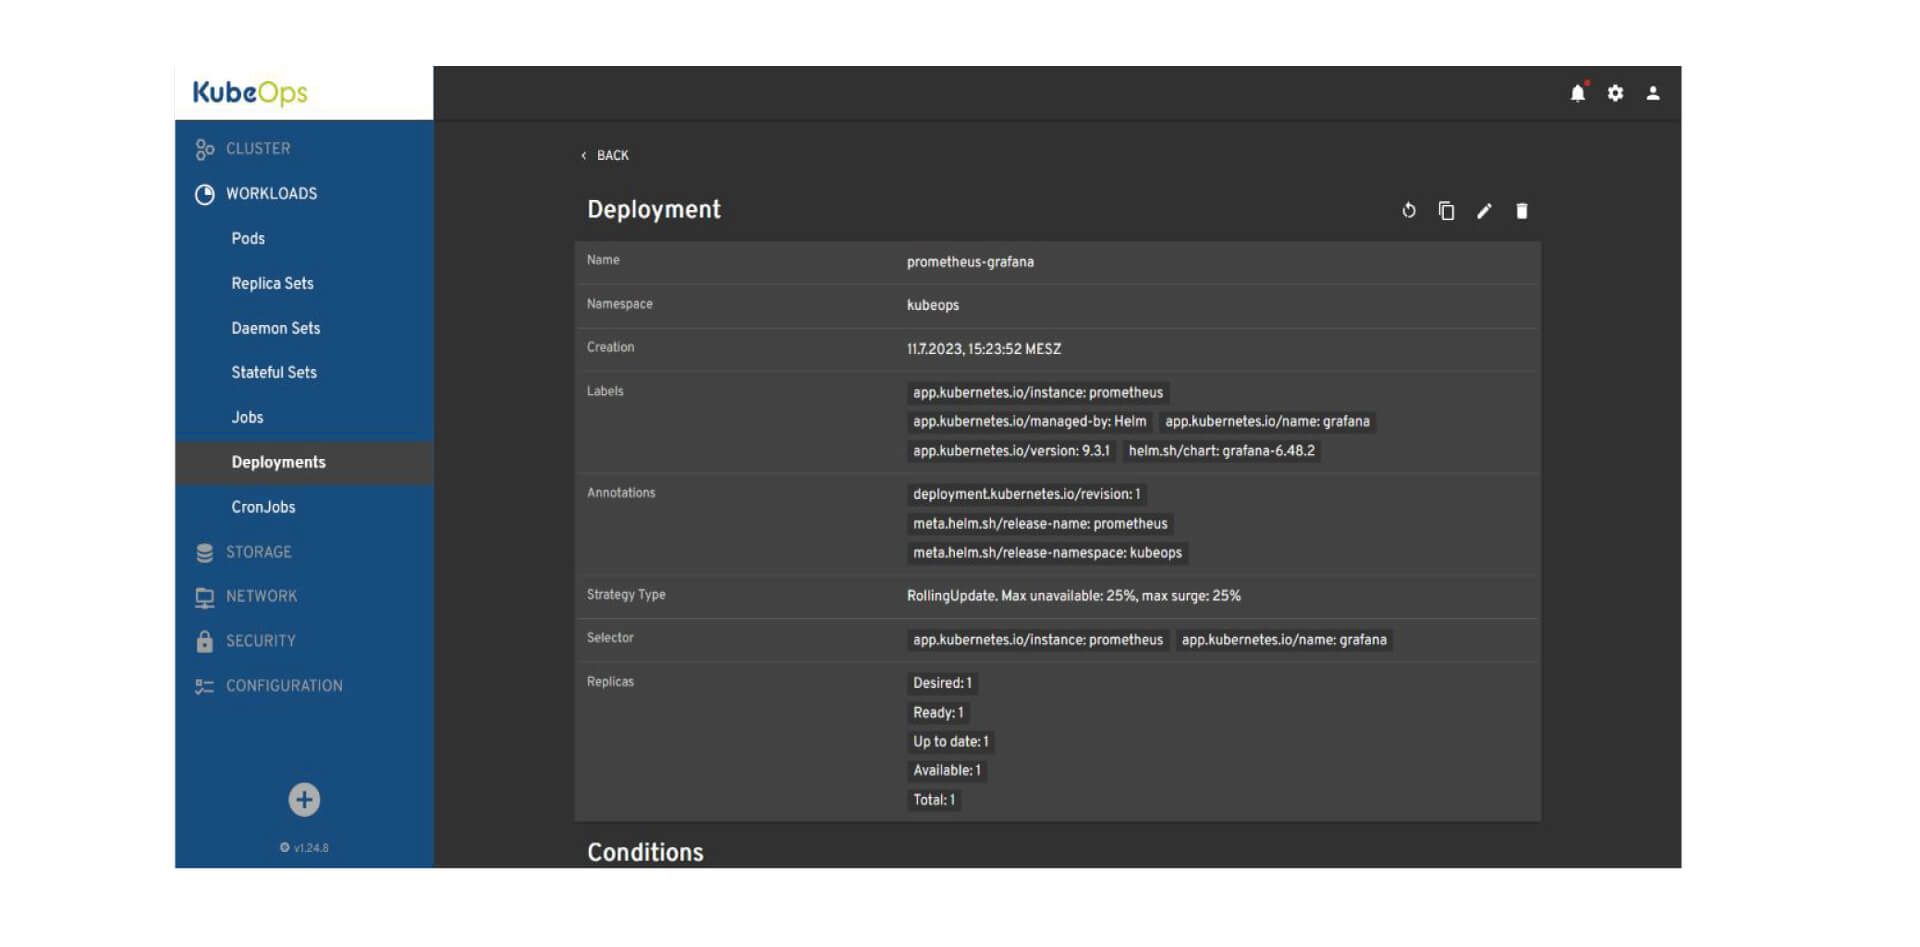 The image depicts a user interface of the KubeOps dashboard displaying details of a deployment named "prometheus-grafana". On the left, there's a navigation sidebar with various menu items such as "Cluster", "Workloads", "Storage", "Network", "Security", and "Configuration". The main panel shows the deployment's name, namespace as 'kubeops', creation timestamp, labels, annotations, strategy type 'RollingUpdate', selector, and replica details indicating one desired, ready, up-to-date, available, and total replica. The interface has a dark theme with text and icons in light colors for contrast.